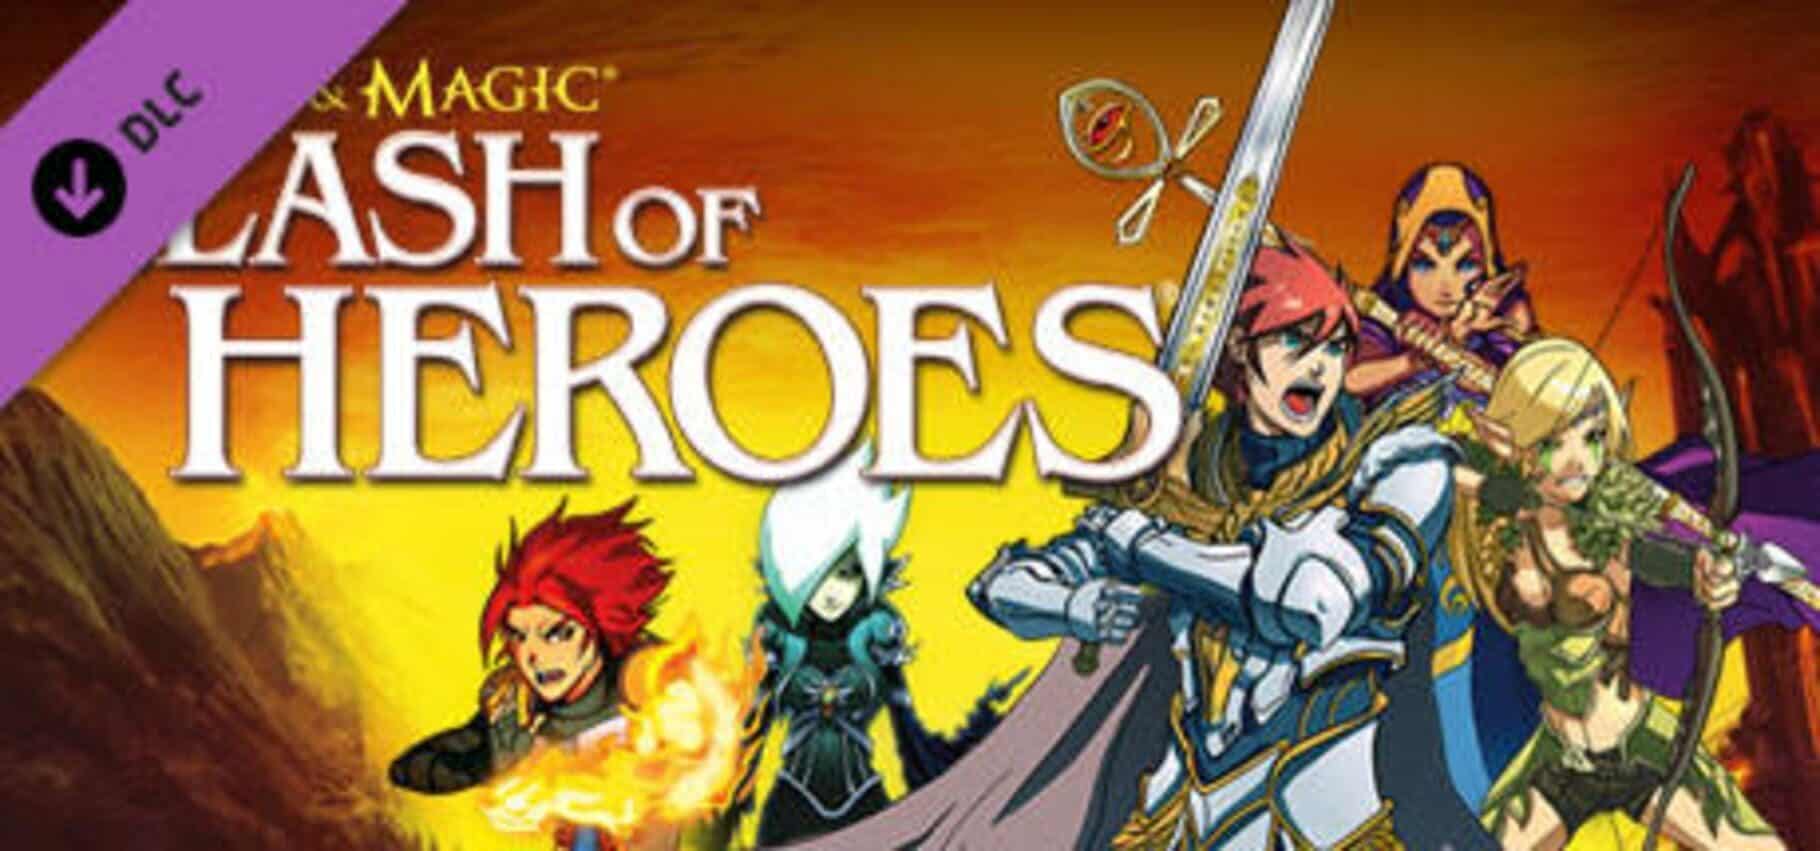 Might & Magic: Clash of Heroes - I Am the Boss